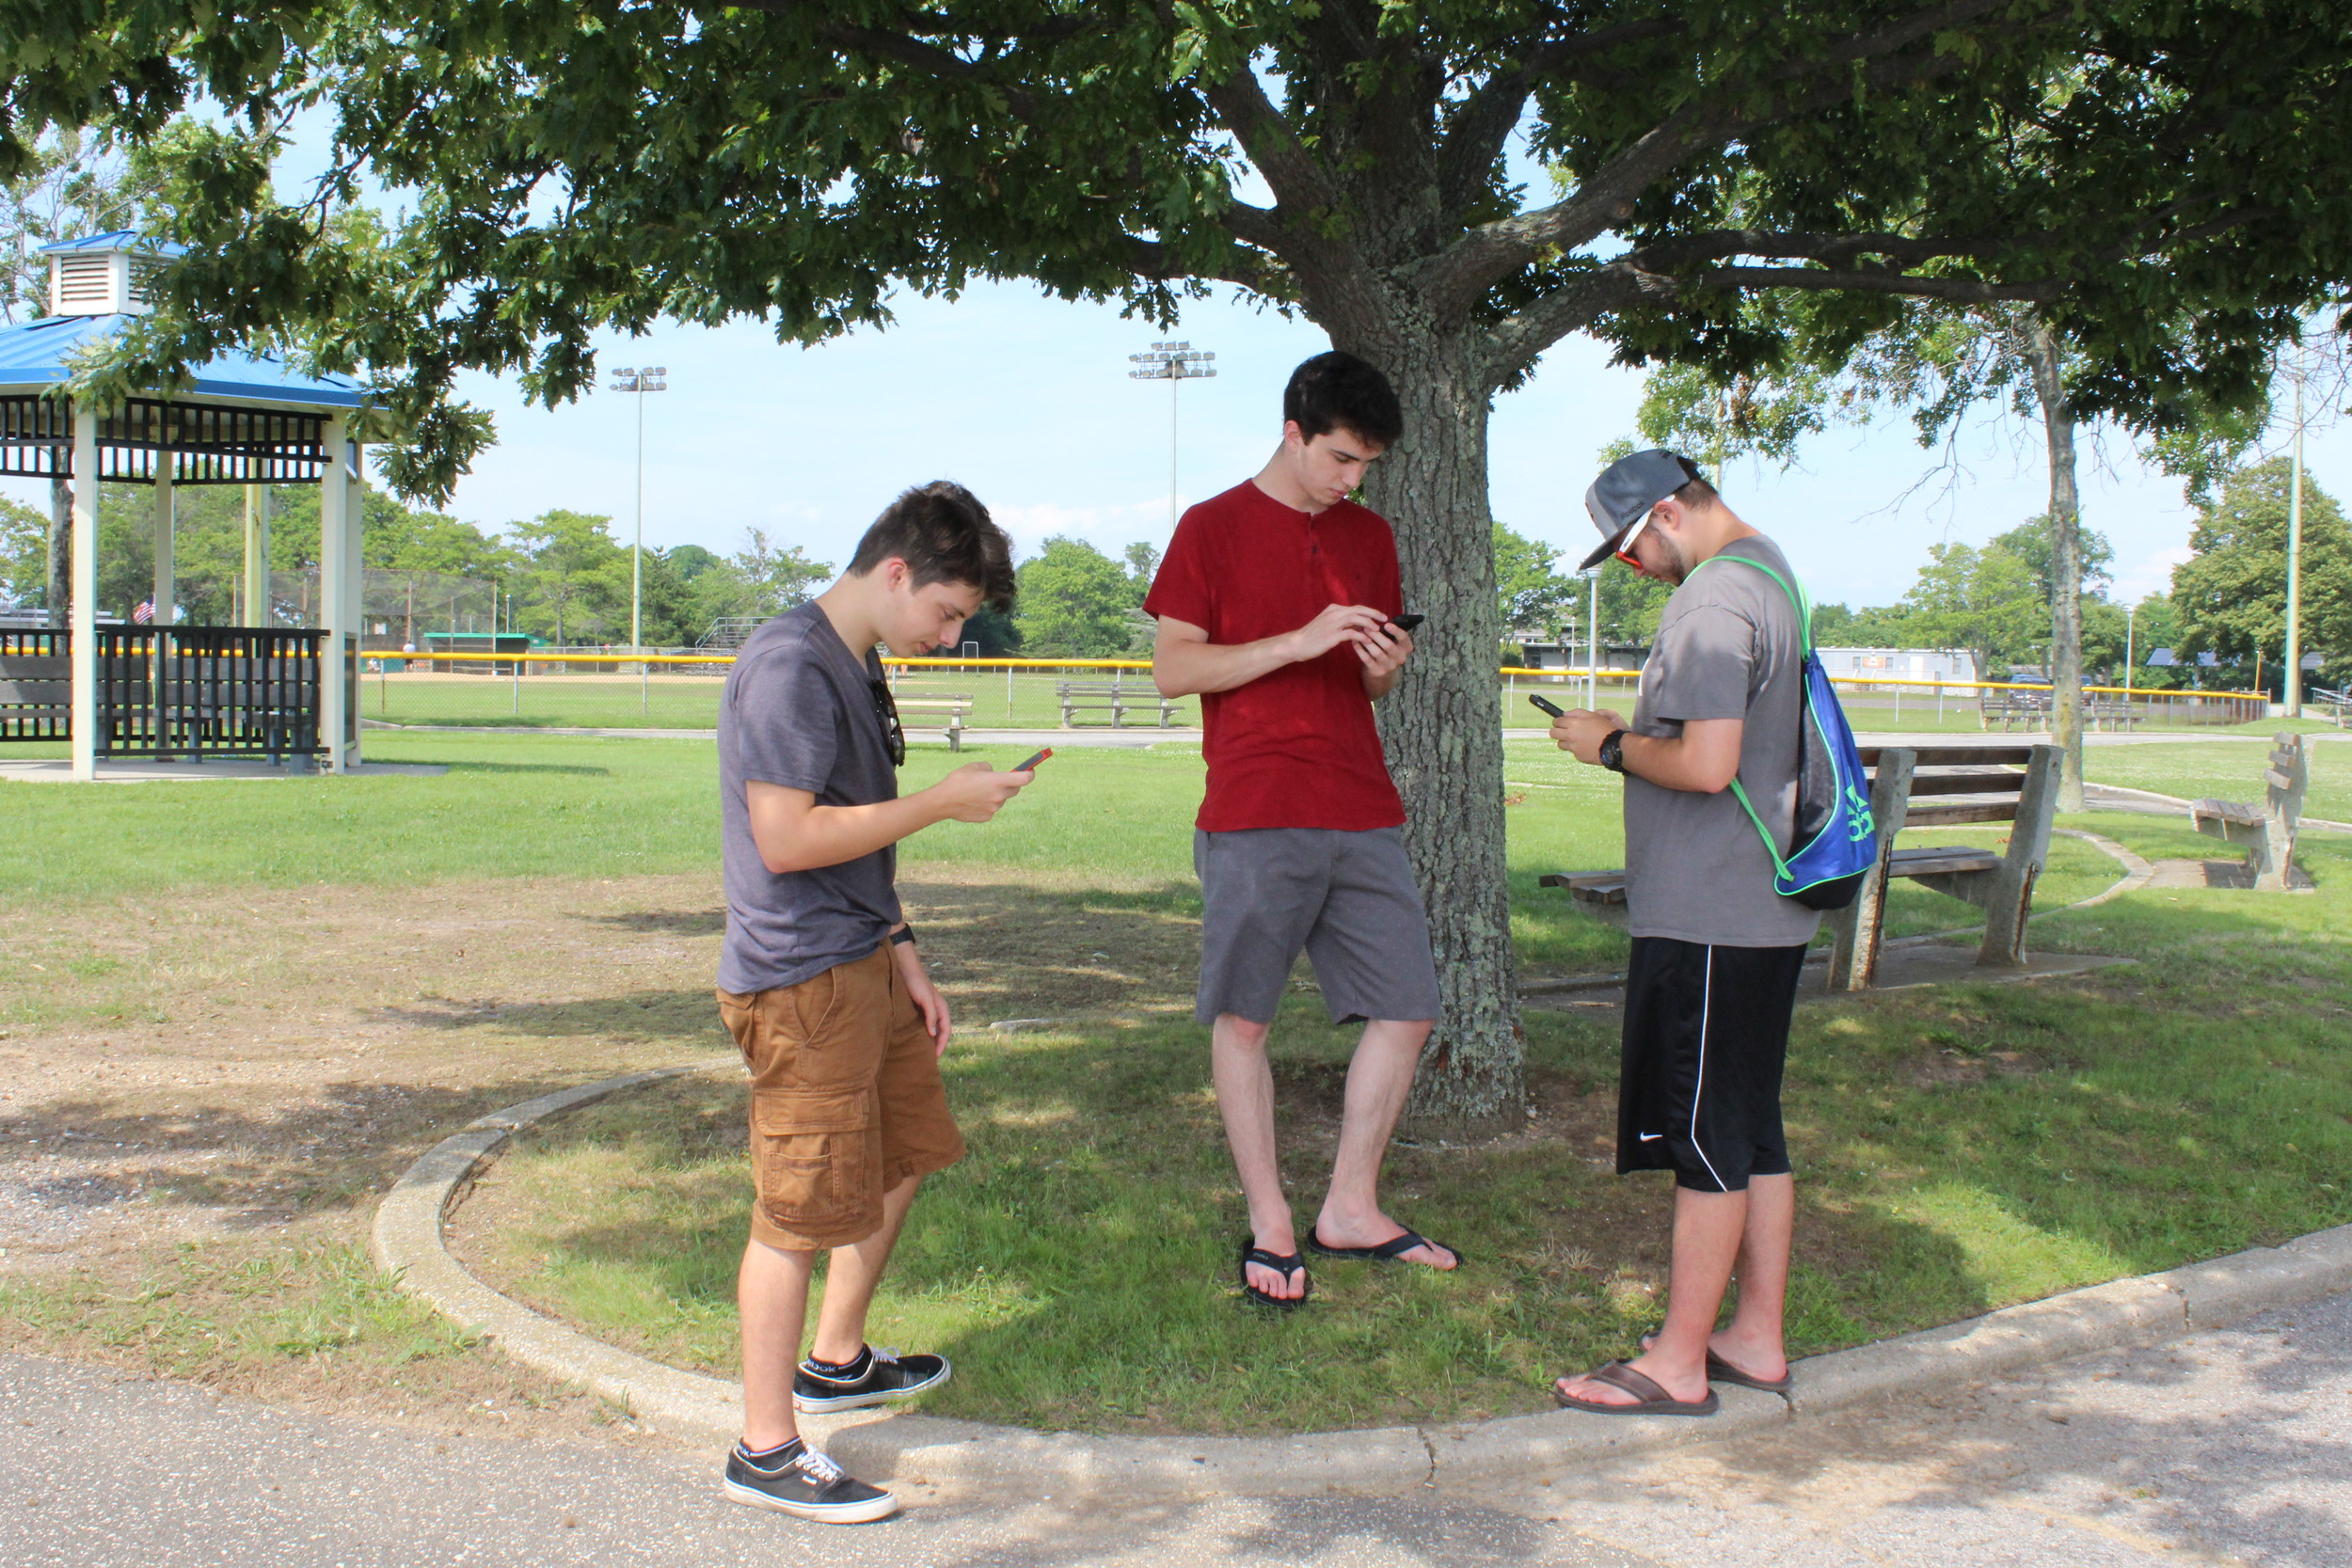 Nick Bonfiglio, Far left, Evan Bartlett and Cory Levy, all of Seaford, tried to catch Pokémon using the new Pokémon Go smartphone app at Seaman’s Neck Park last week.